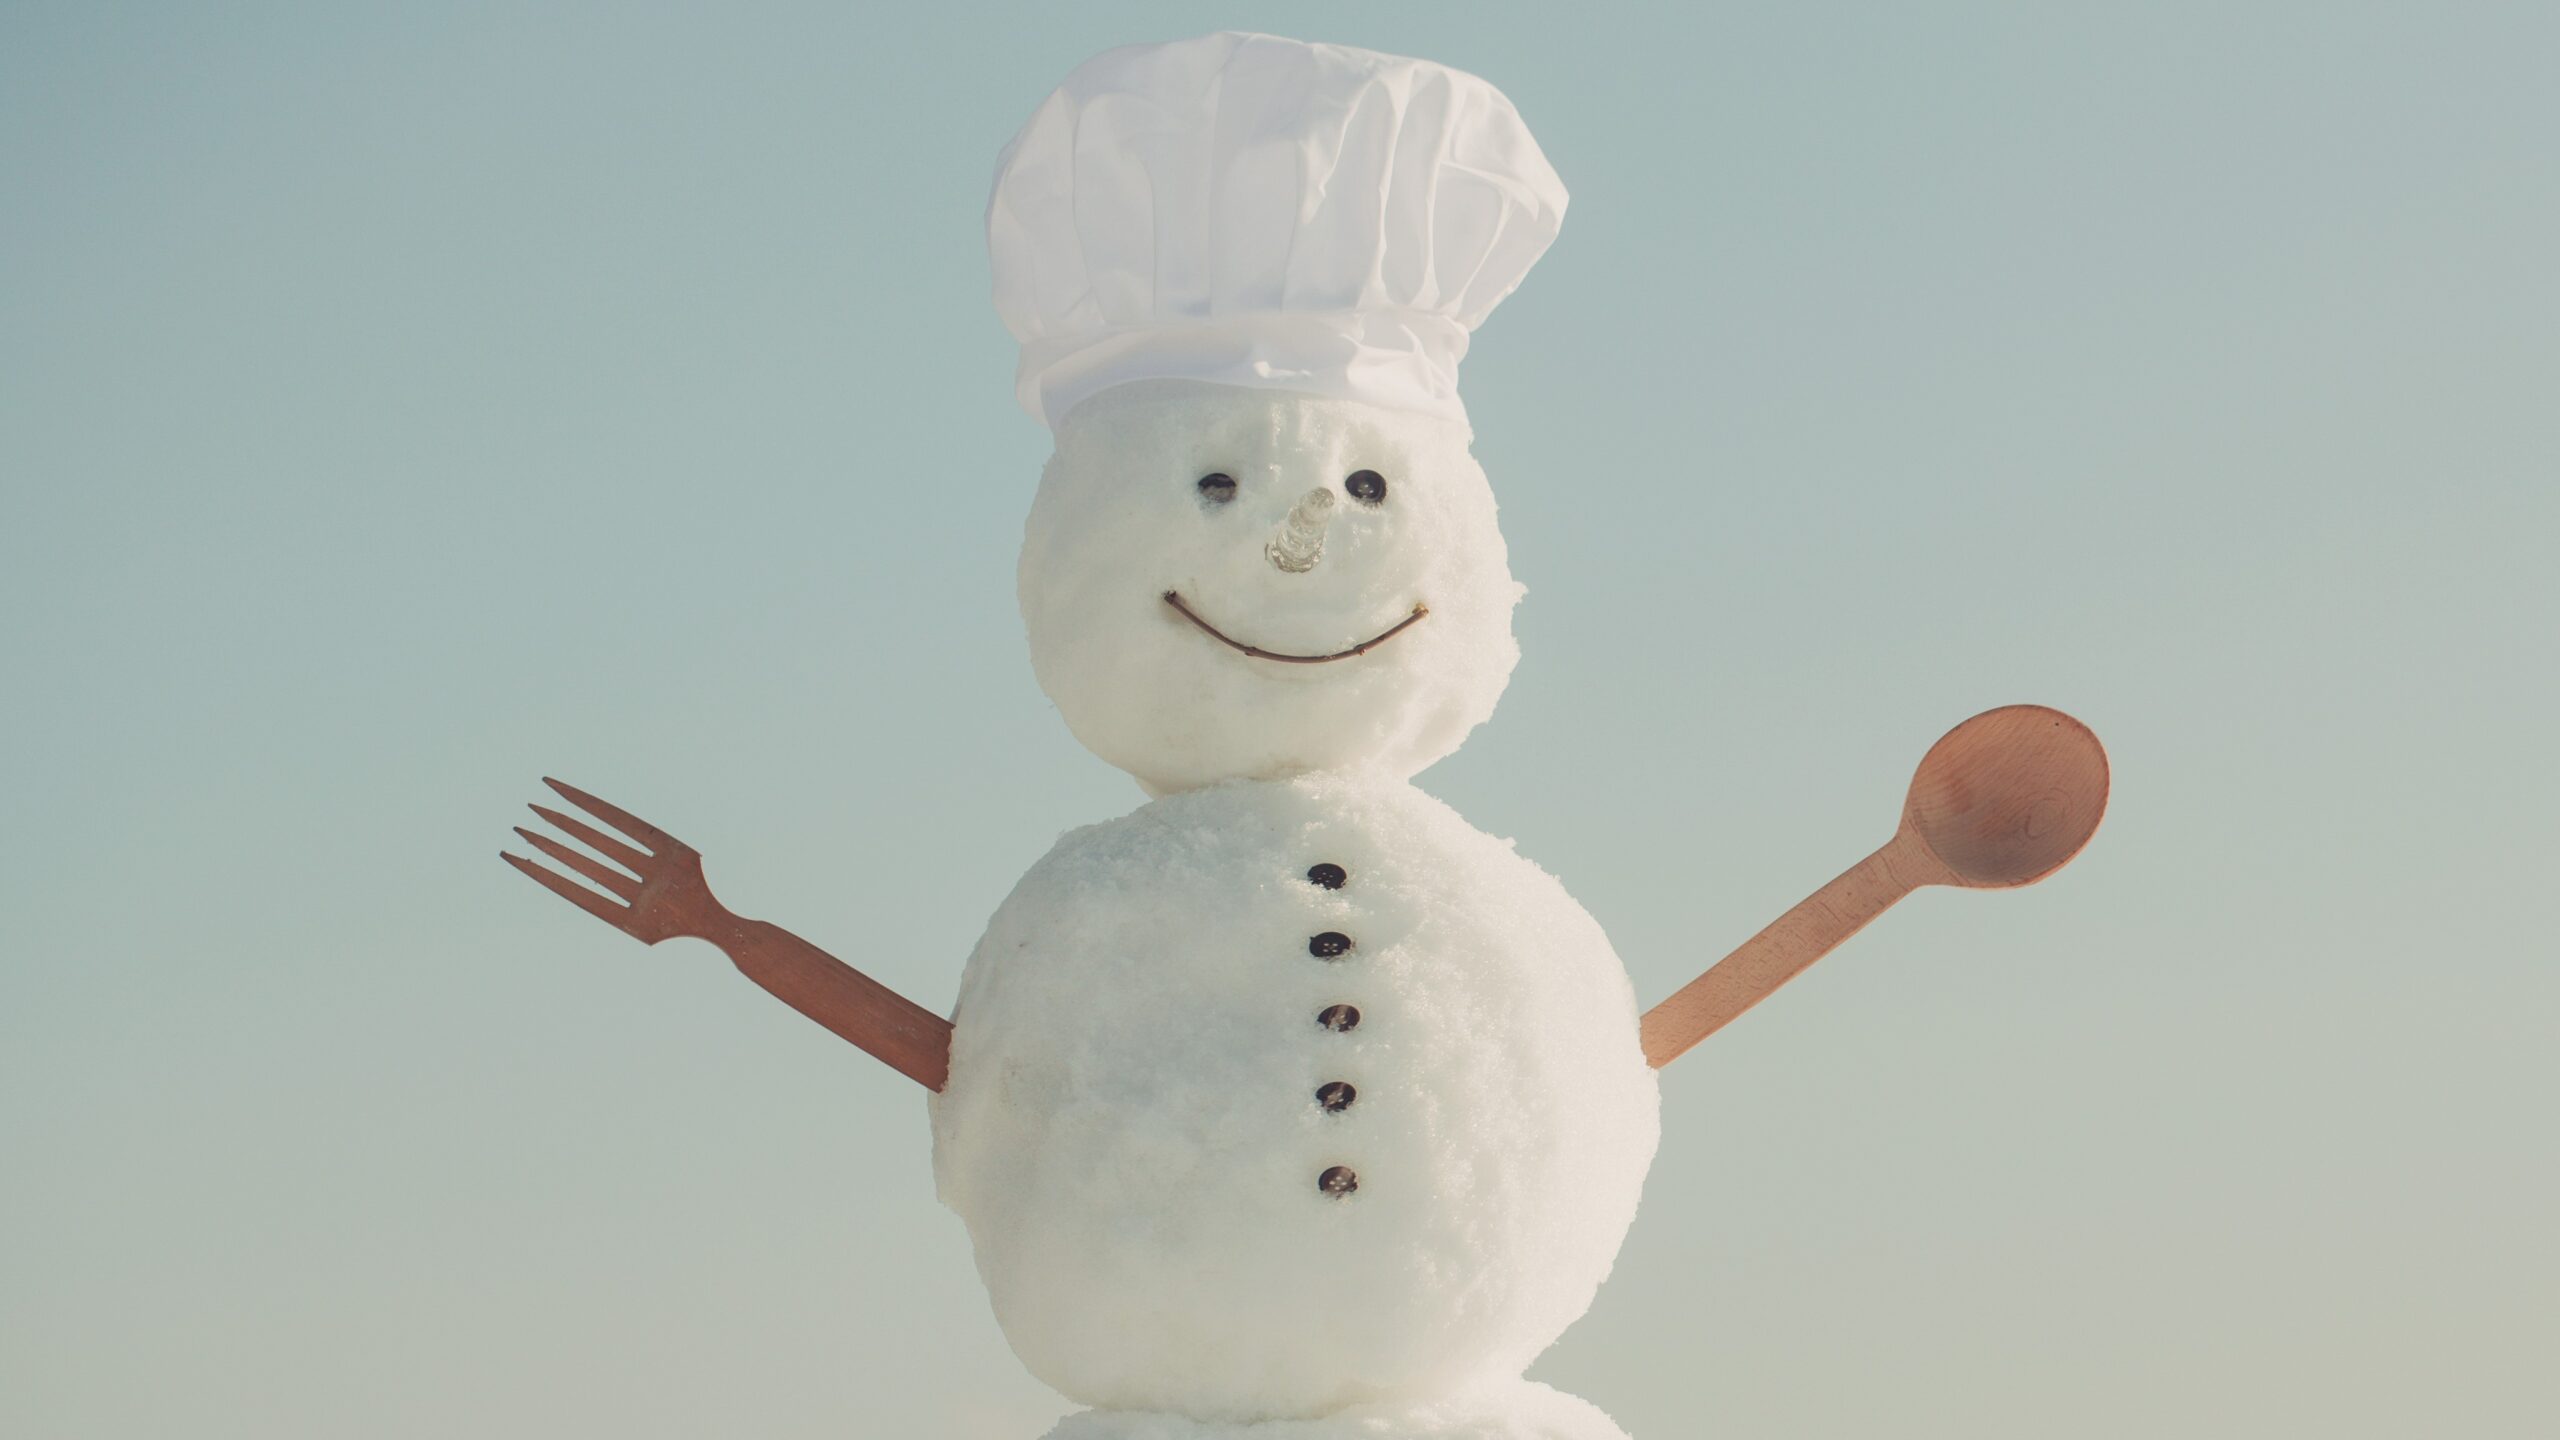 Snowman with a chef's hat and one fork and one spoon for arms